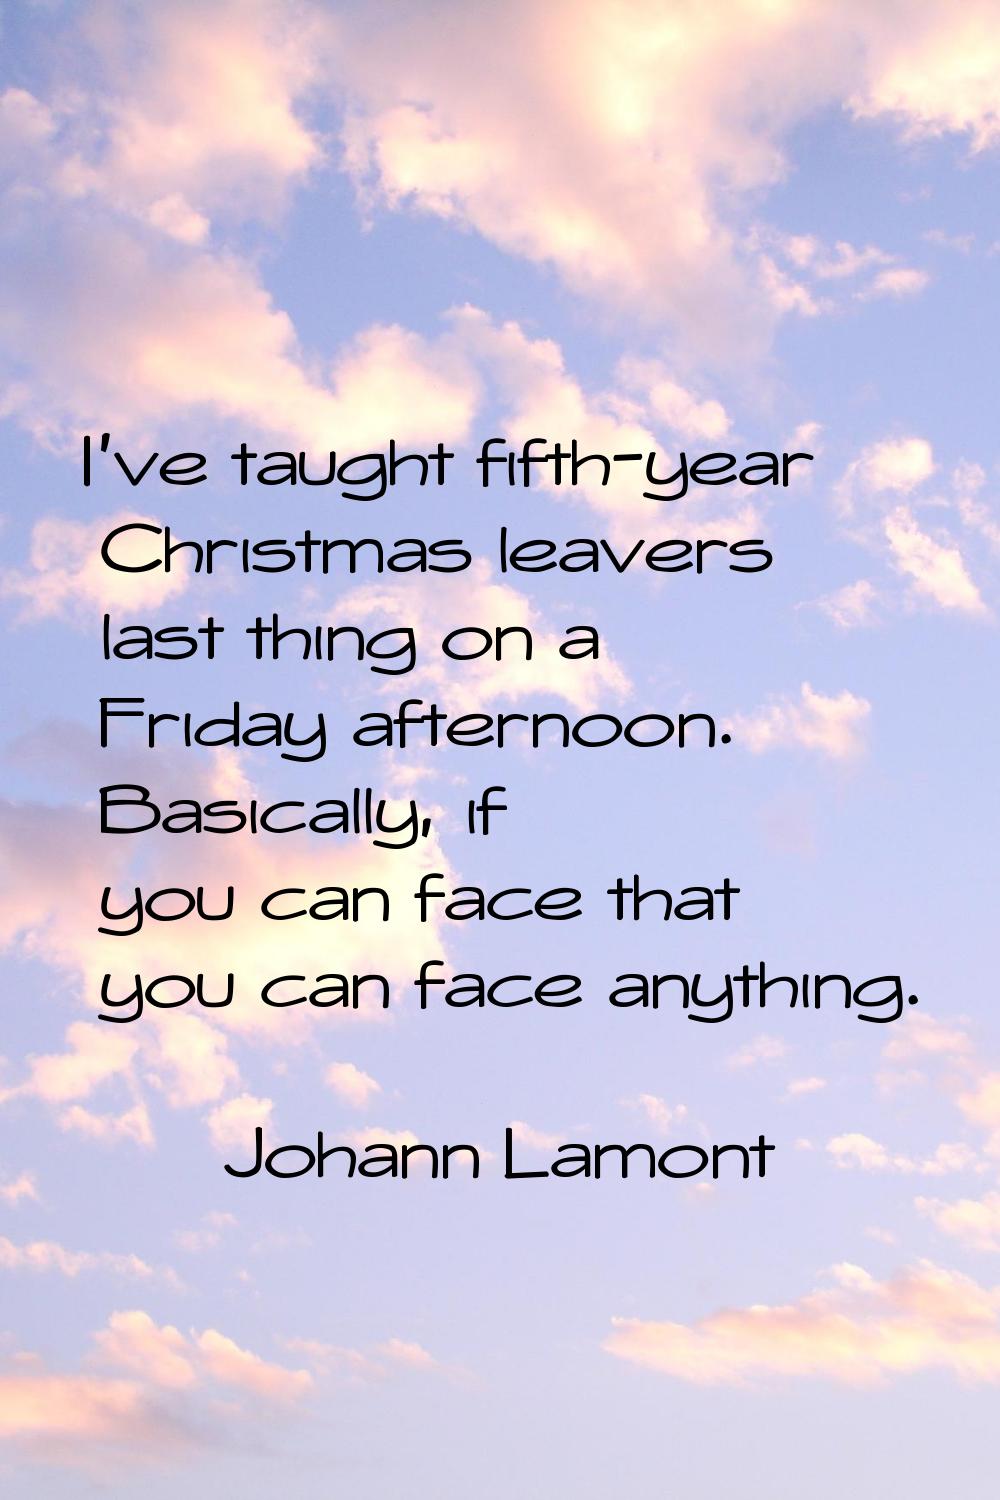 I've taught fifth-year Christmas leavers last thing on a Friday afternoon. Basically, if you can fa